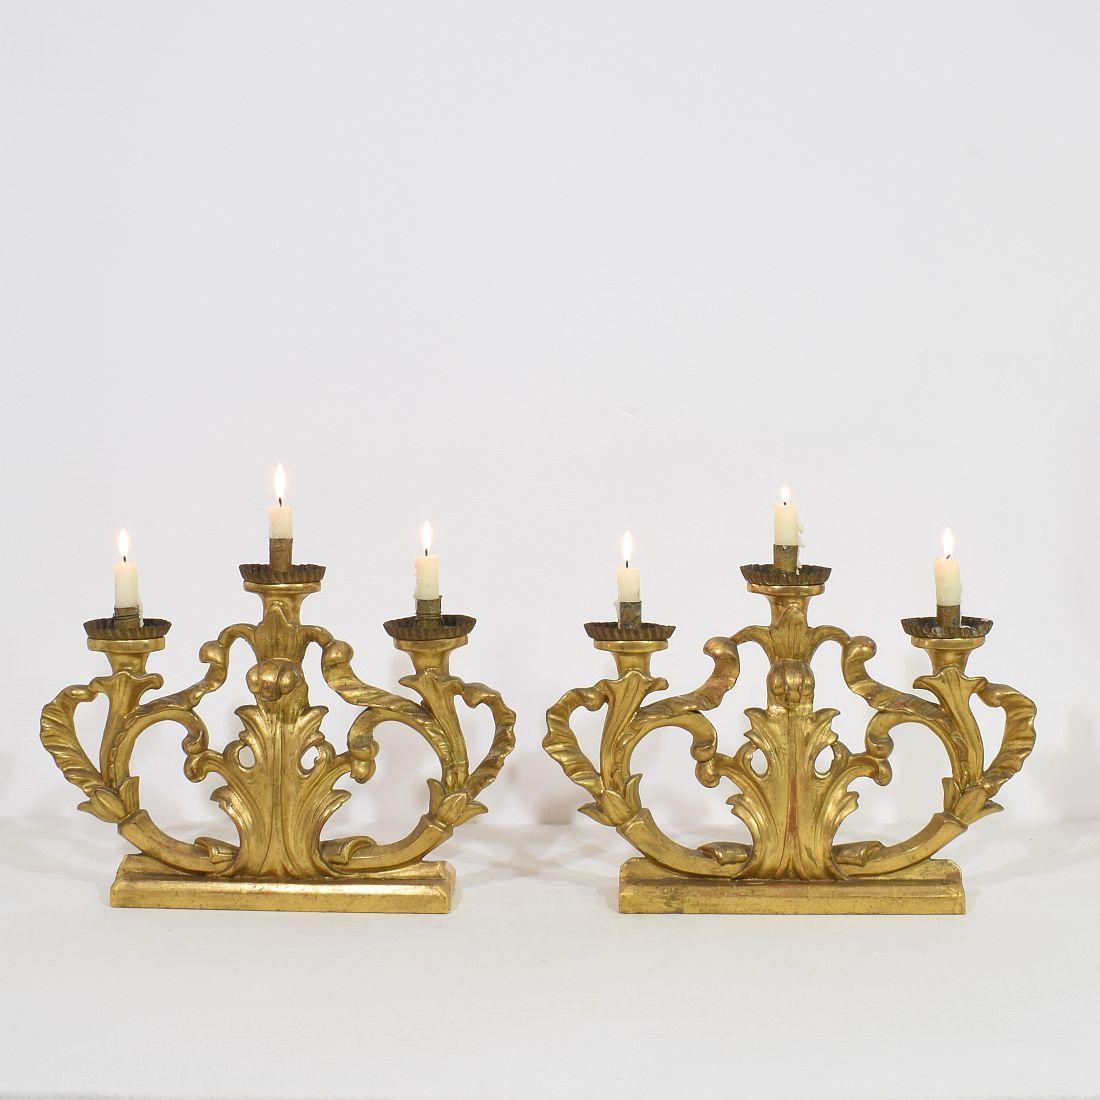 Unique Baroque giltwood candleholders for in total 6 candles, Italy, circa 1750-1780. Weathered, repairs and losses.
More pictures available on request. Measurement individual.